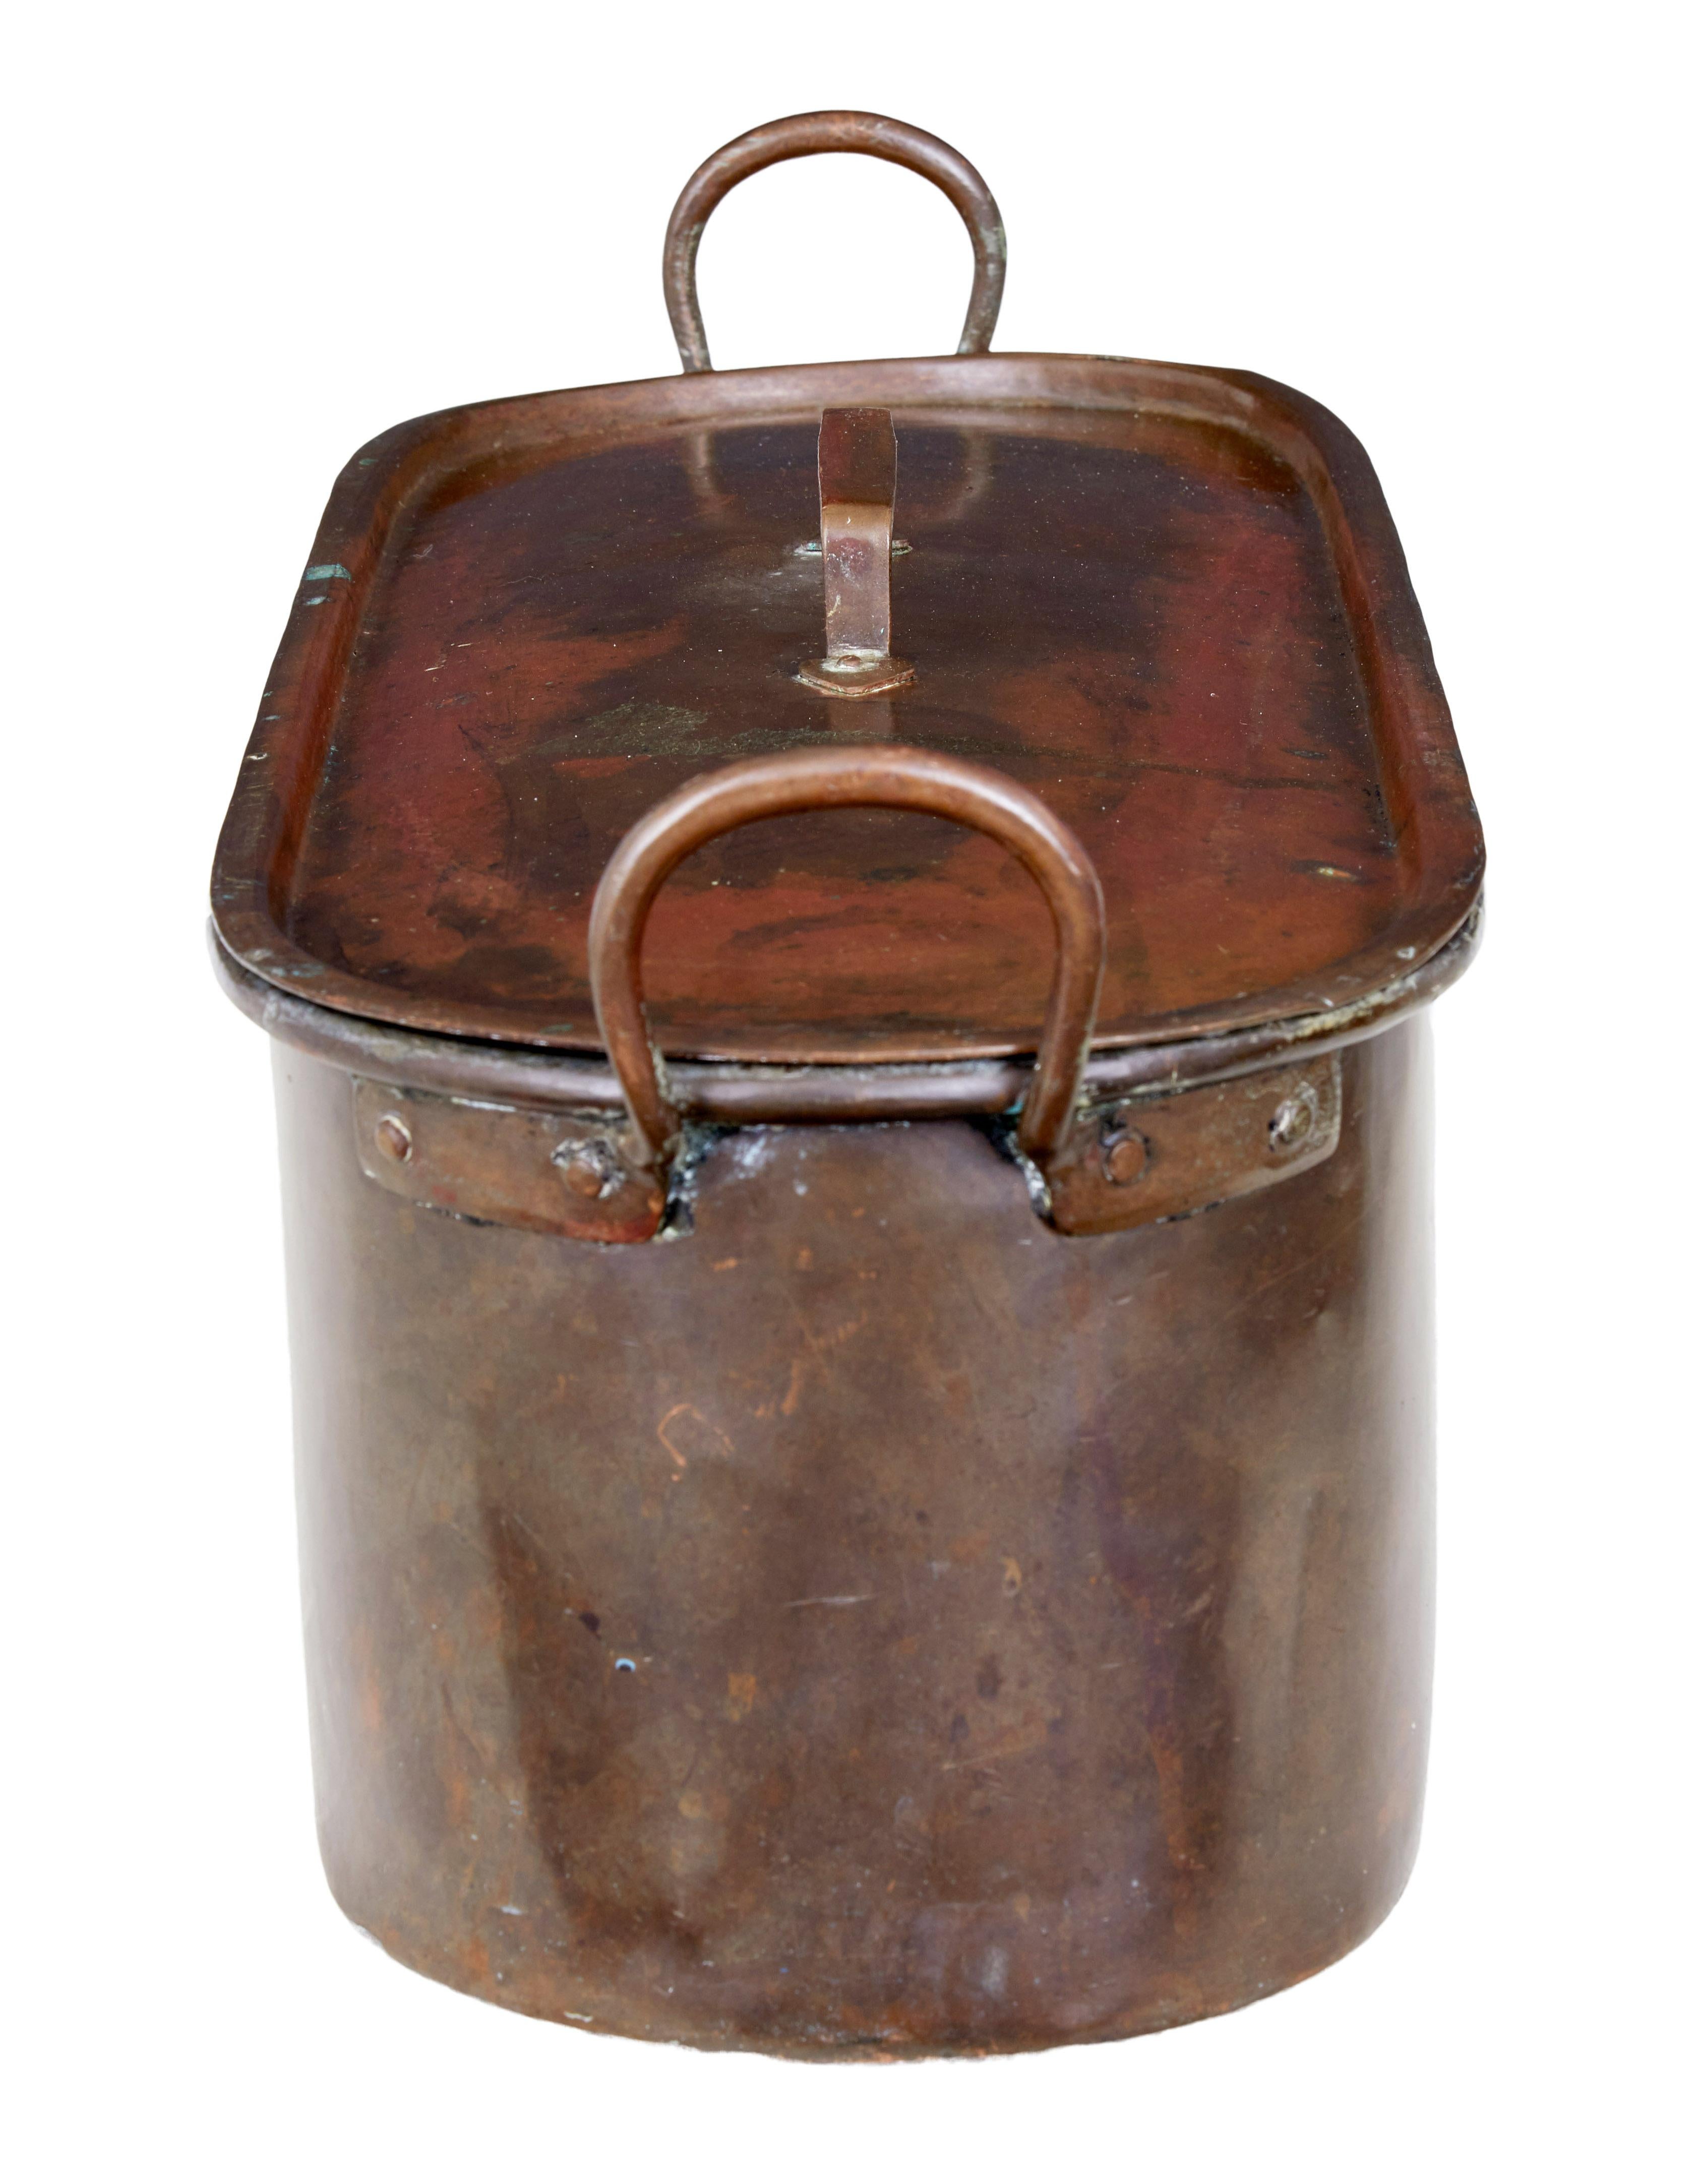 Late 19th century copper fish kettle, circa 1880.

Substantial large Victorian fish kettle, complete with original lid which still sits reasonable flush. Looped handles to each end and handle to lid. We are presenting this kettle in its original